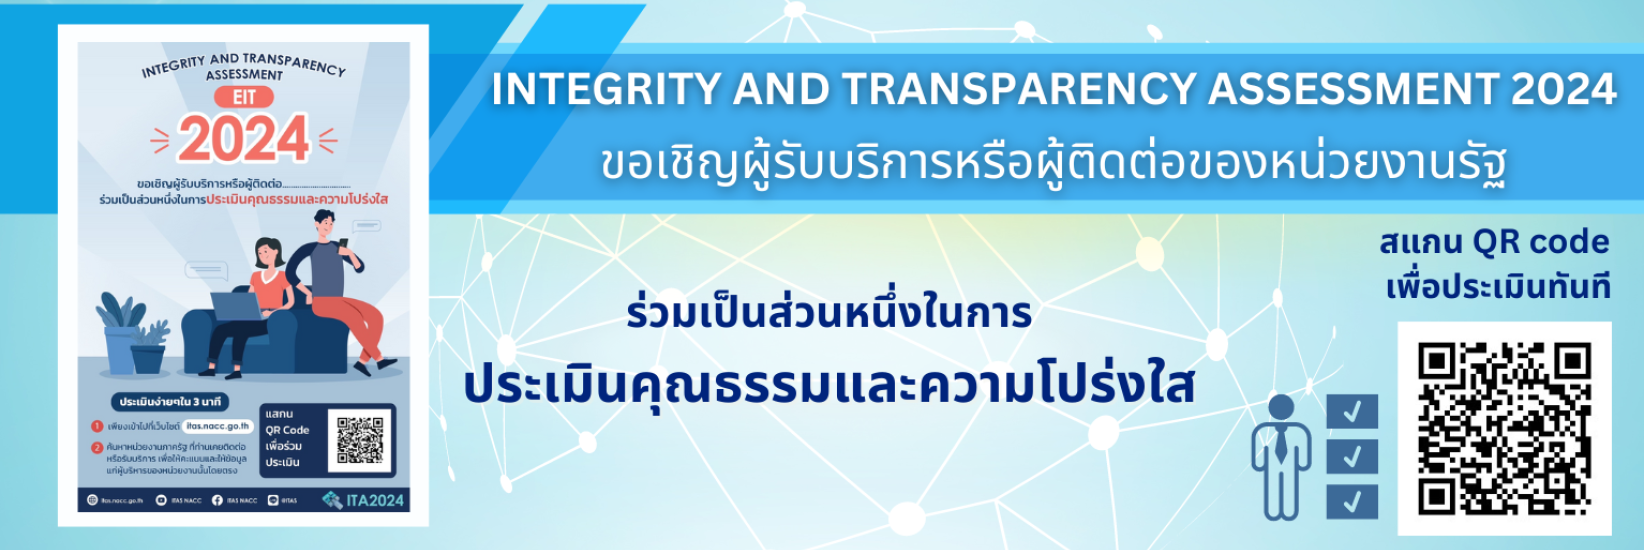 INTEGRITY AND TRANSPARENCY ASSESSMENT 2024